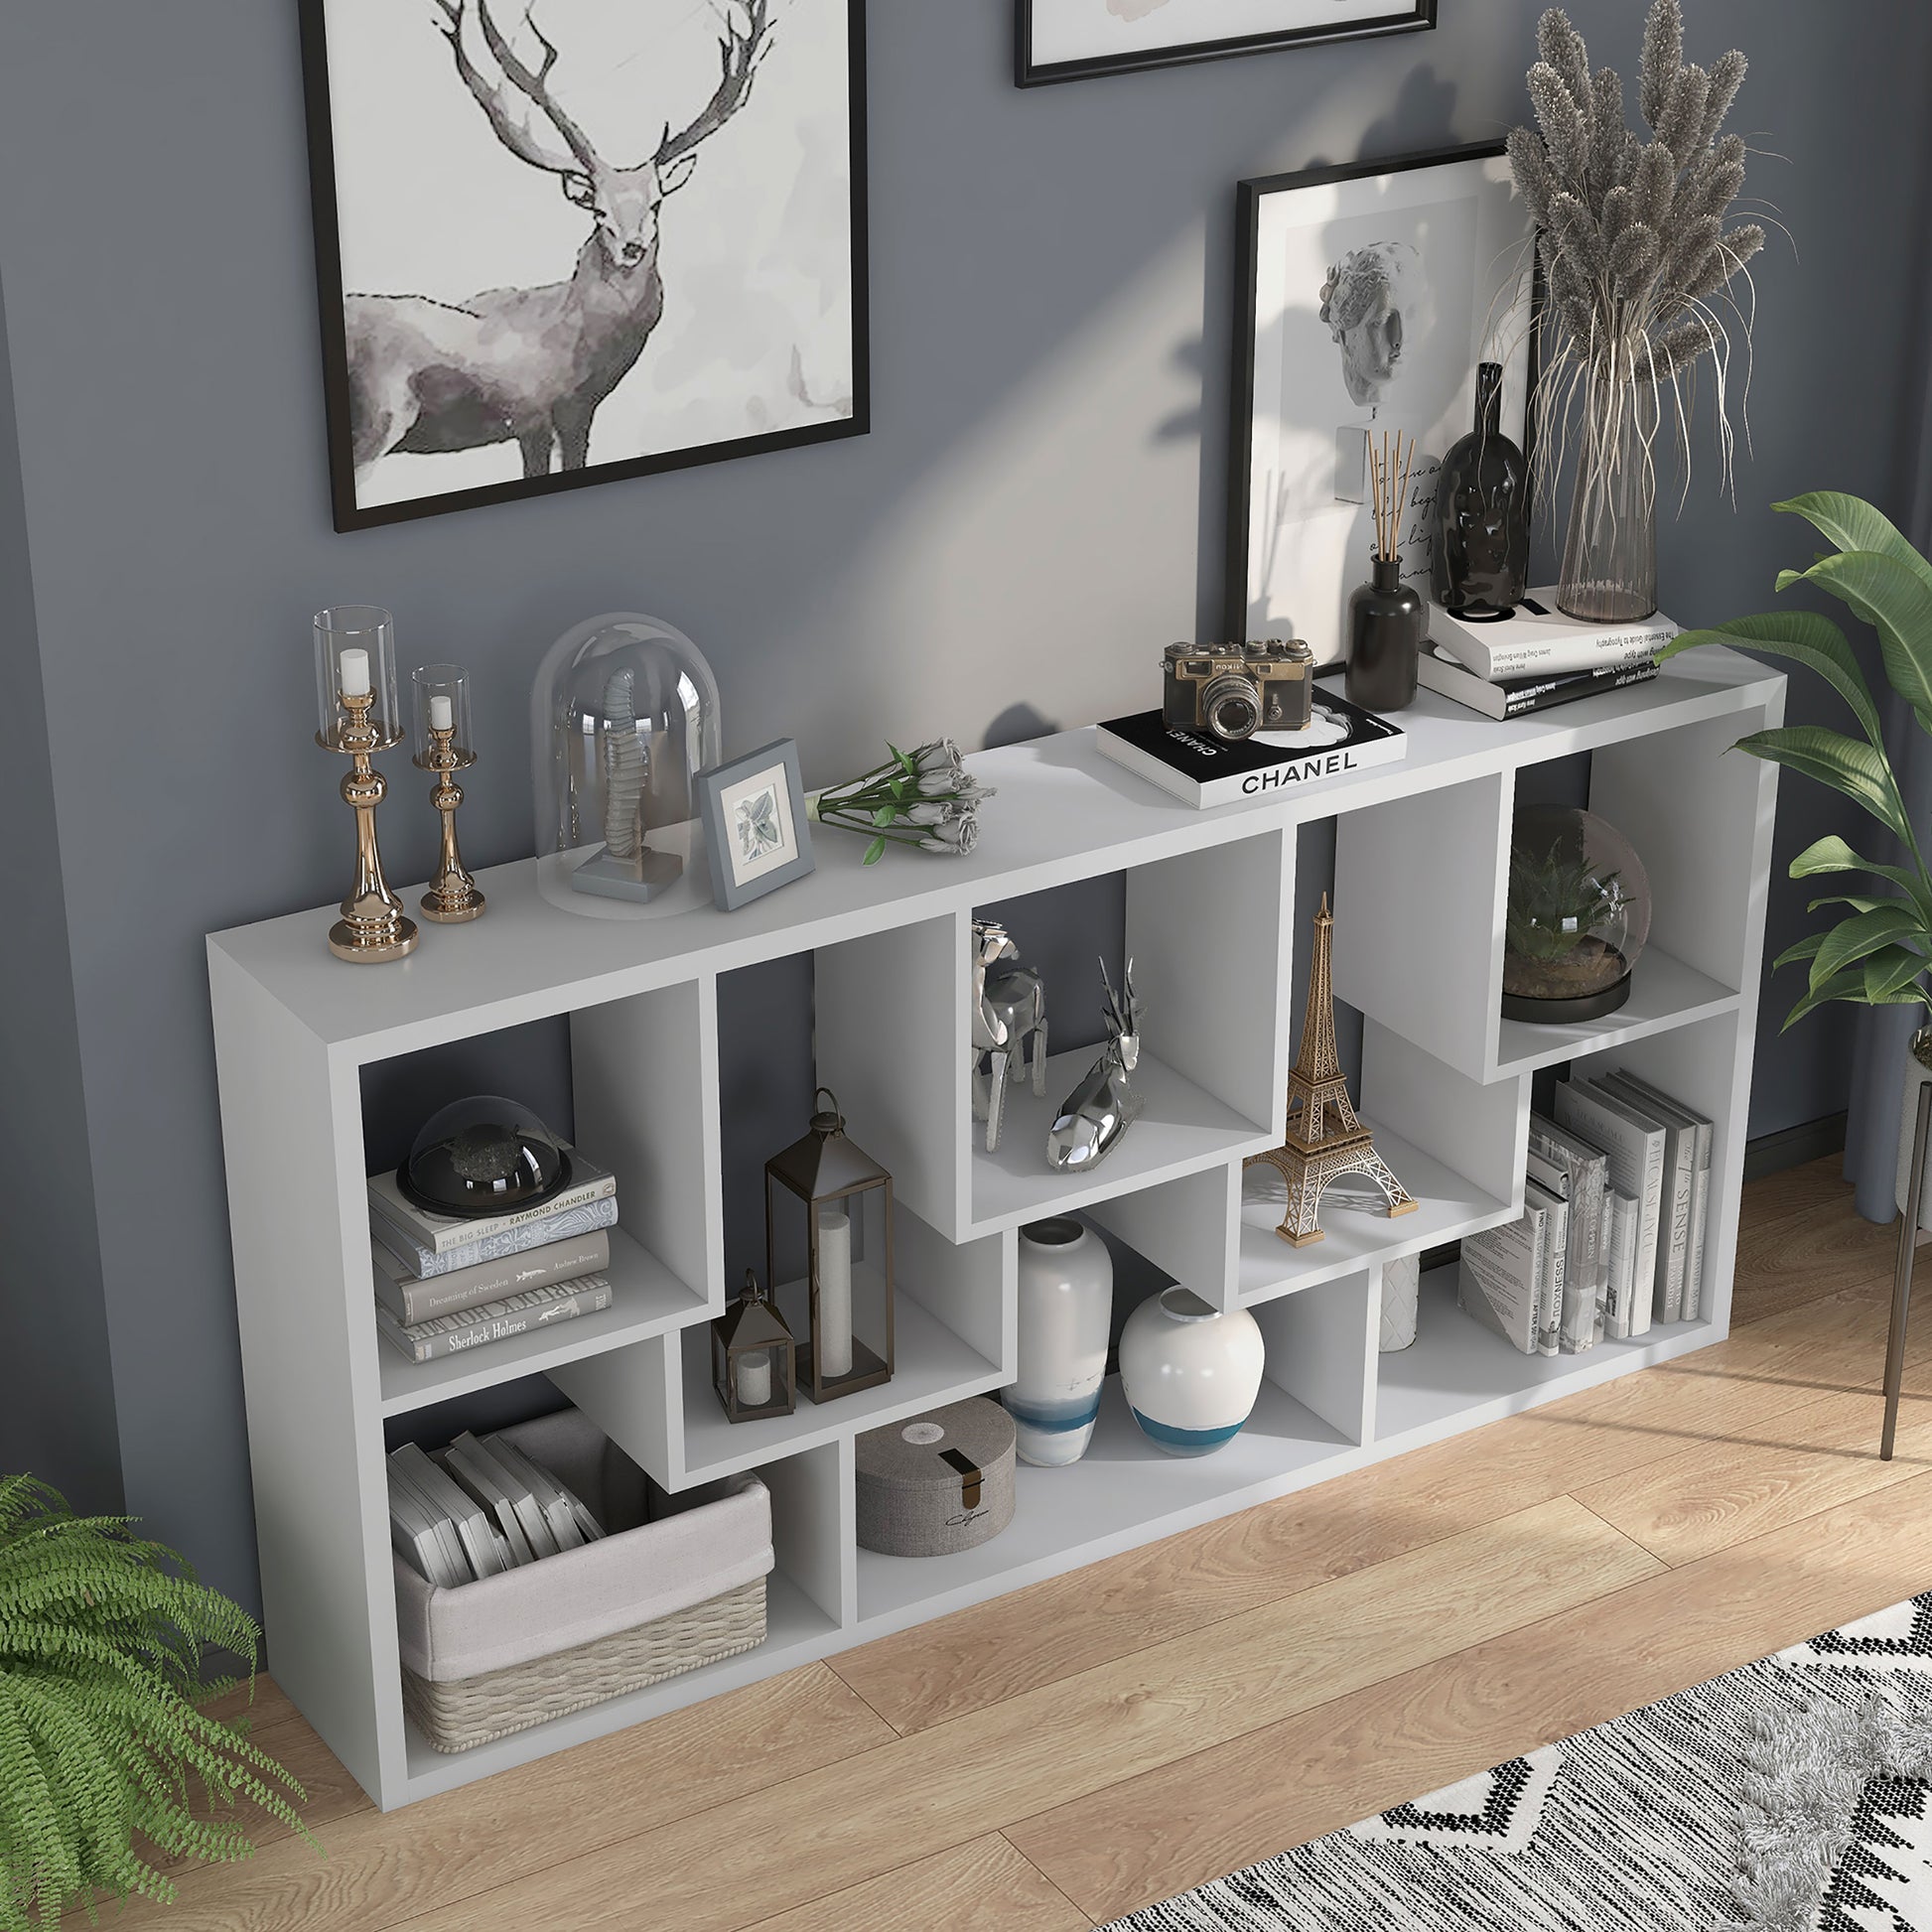 Right angled bird's eye view of a horizontal modern white geometric open display bookcase in a living room with accessories